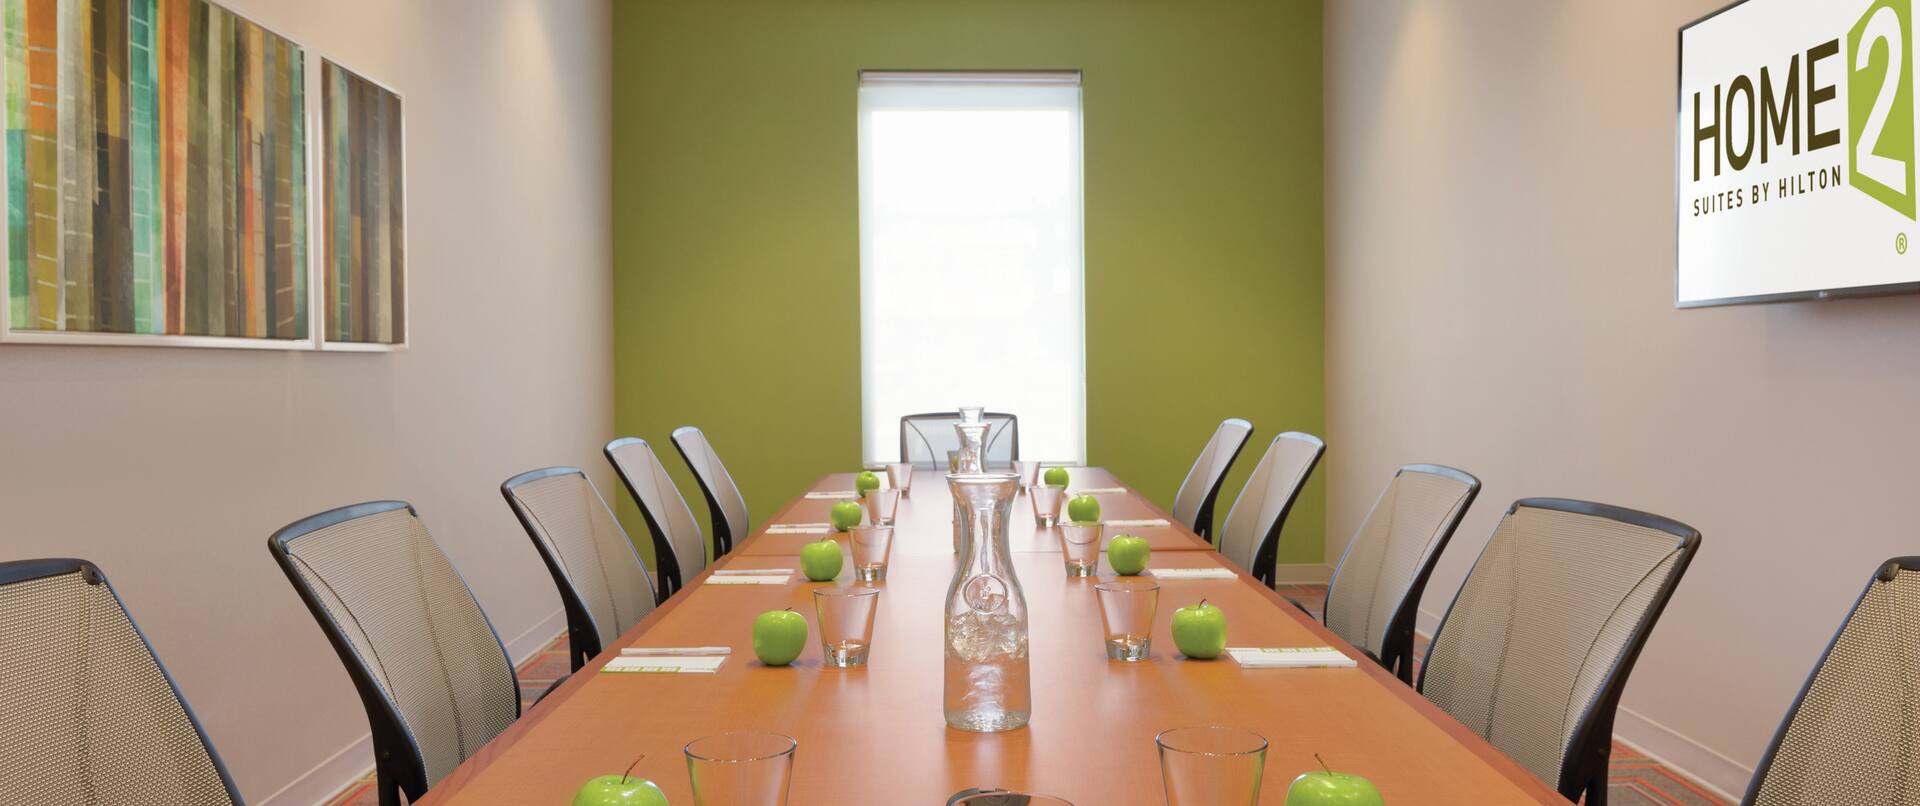 Boardroom with long table set with pens, paper, water glasses, and green apples